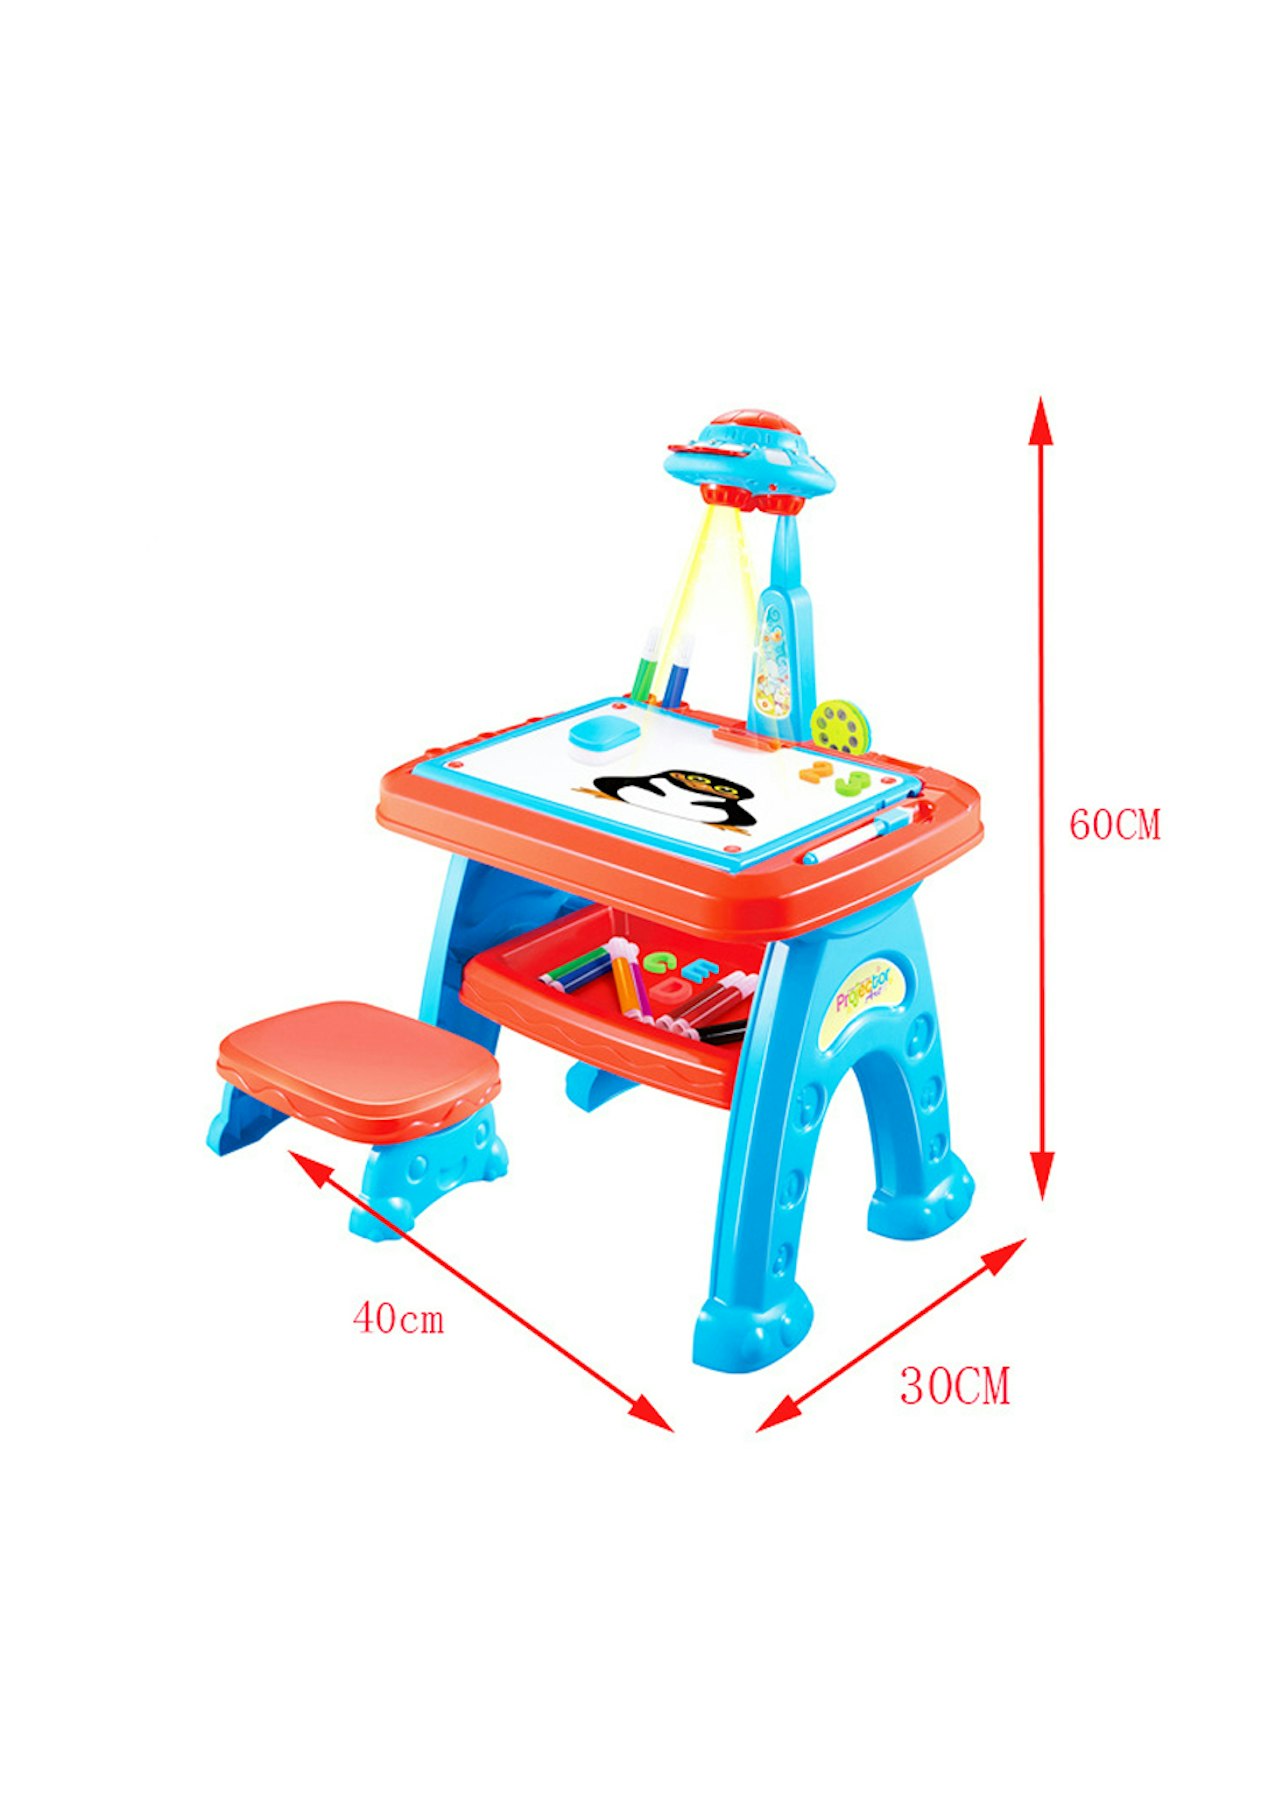 Kid S Drawing Projector Painting Desk Set Blue The Toy Sale